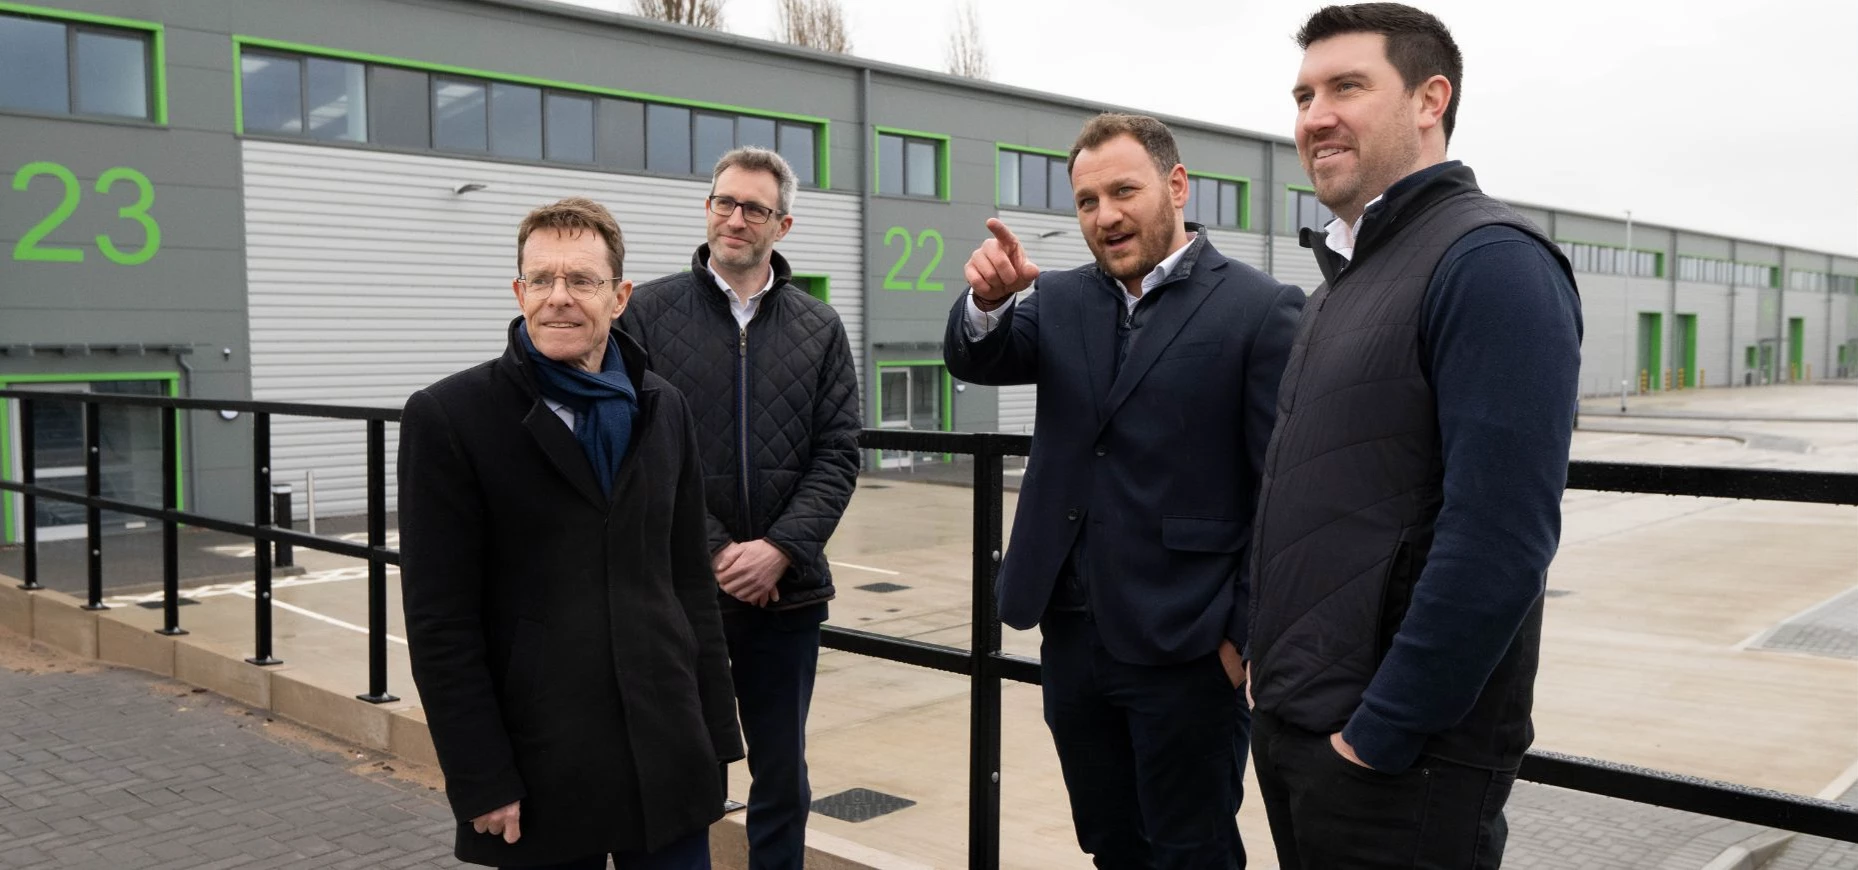 (L-R): Andy Street, Mayor of the West Midlands and Chair of the WMCA, Ed Bradburn, FDC Investment Director, Rob Watts, Development Manager at Chancerygate and Dan Powers, Project Management Director at the newly completed Holbrook Park in Coventry.